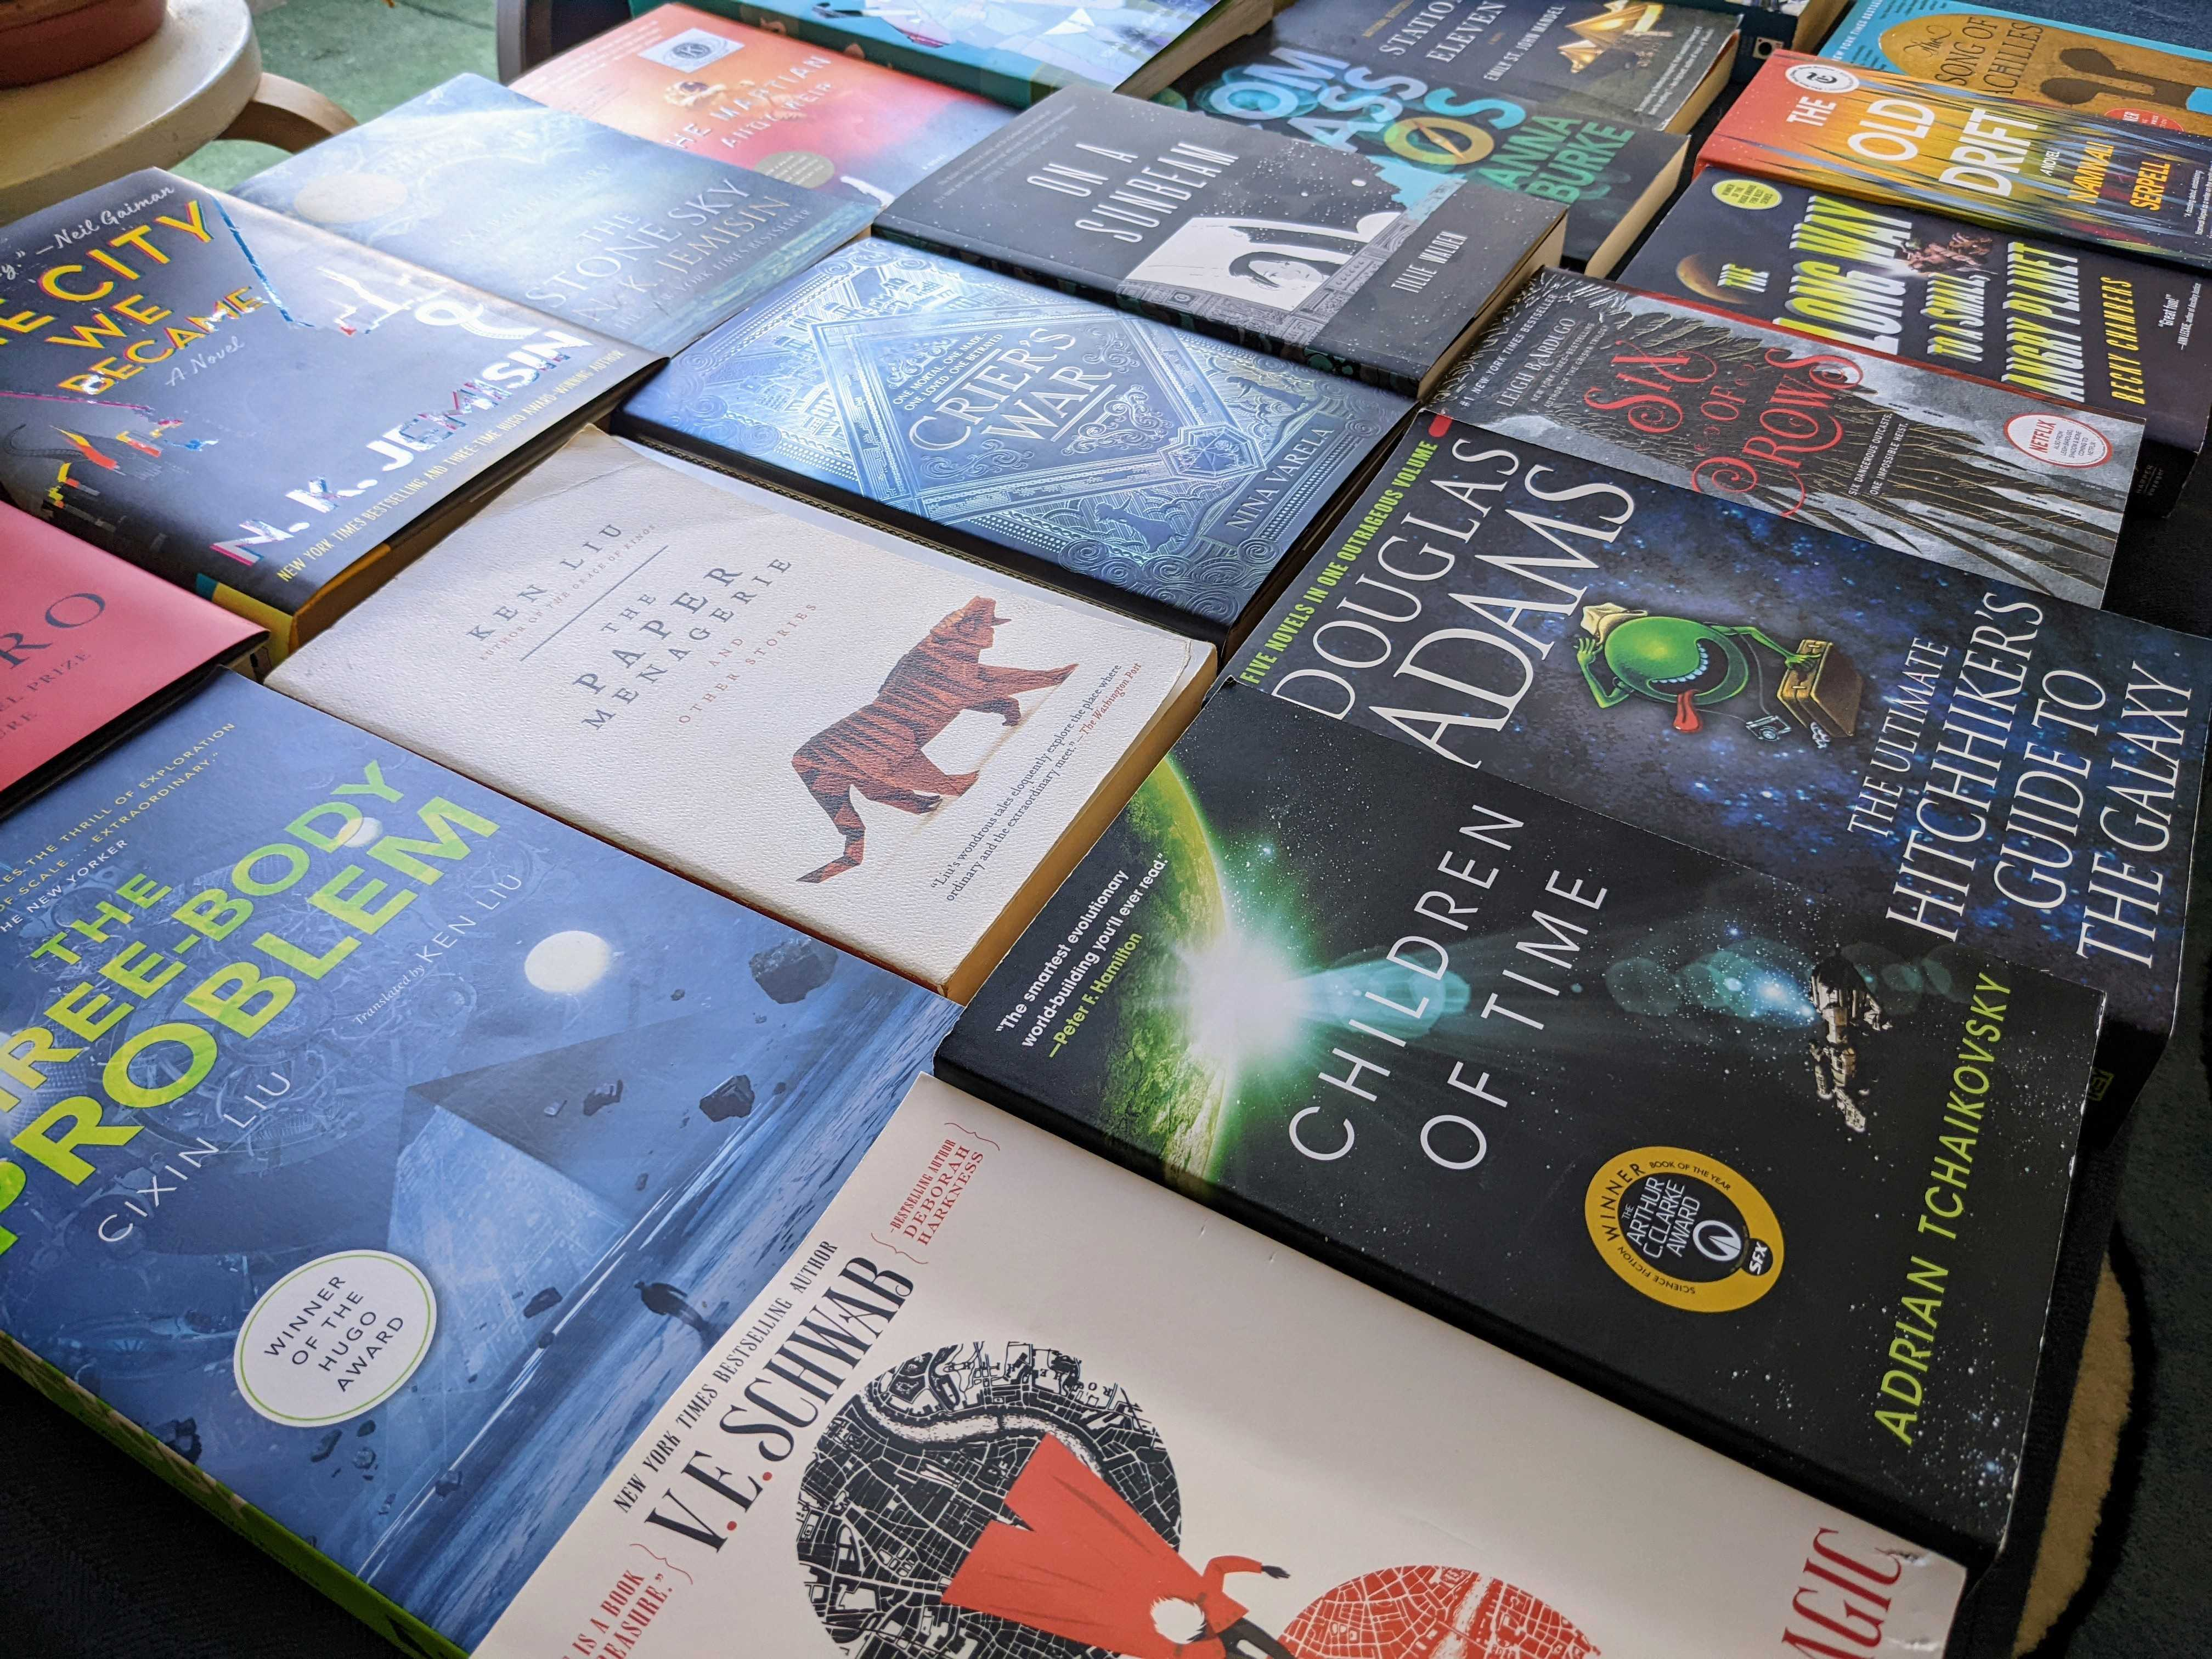 An image of science fiction and fantasy books laid down side by side, shot at an angle. Books include Children of Time, Three-Body Problem, On a Sunbeam, Six of Crows, and others.